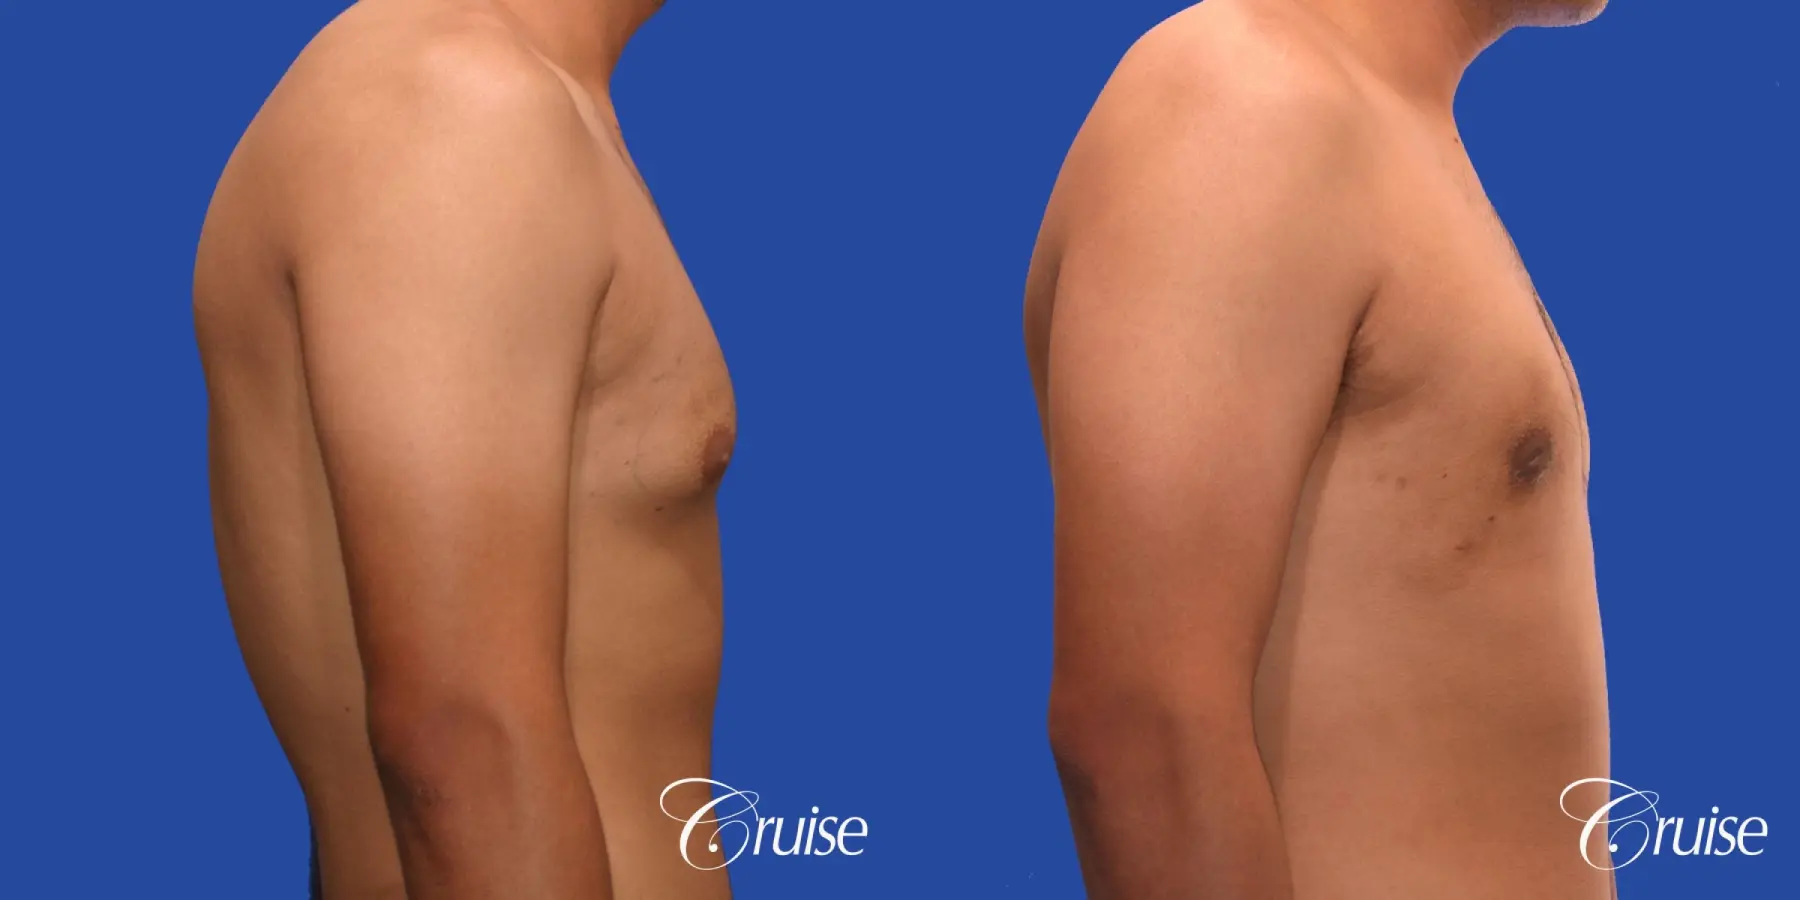 mild gynecomastia standard PA areola incision - Before and After 4